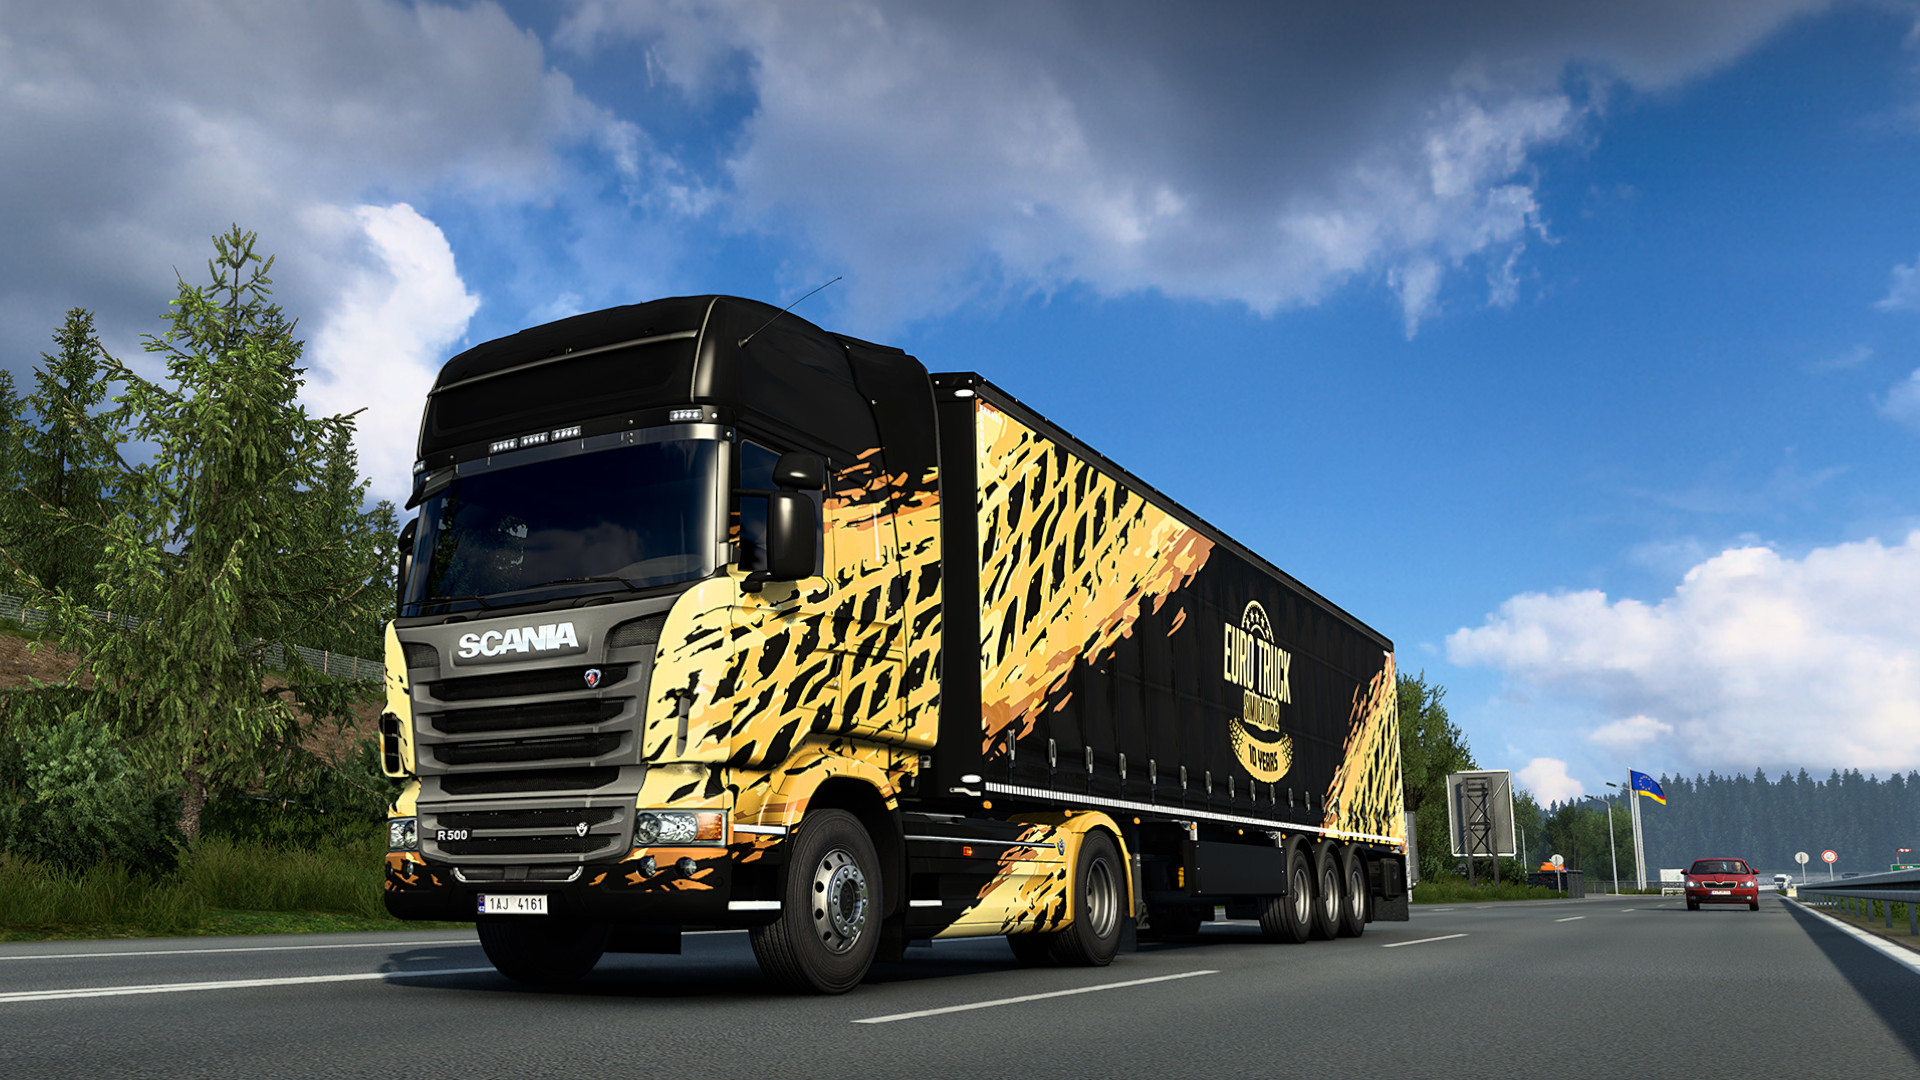 Euro Truck Simulator 2 has sold 13 million copies and a frankly